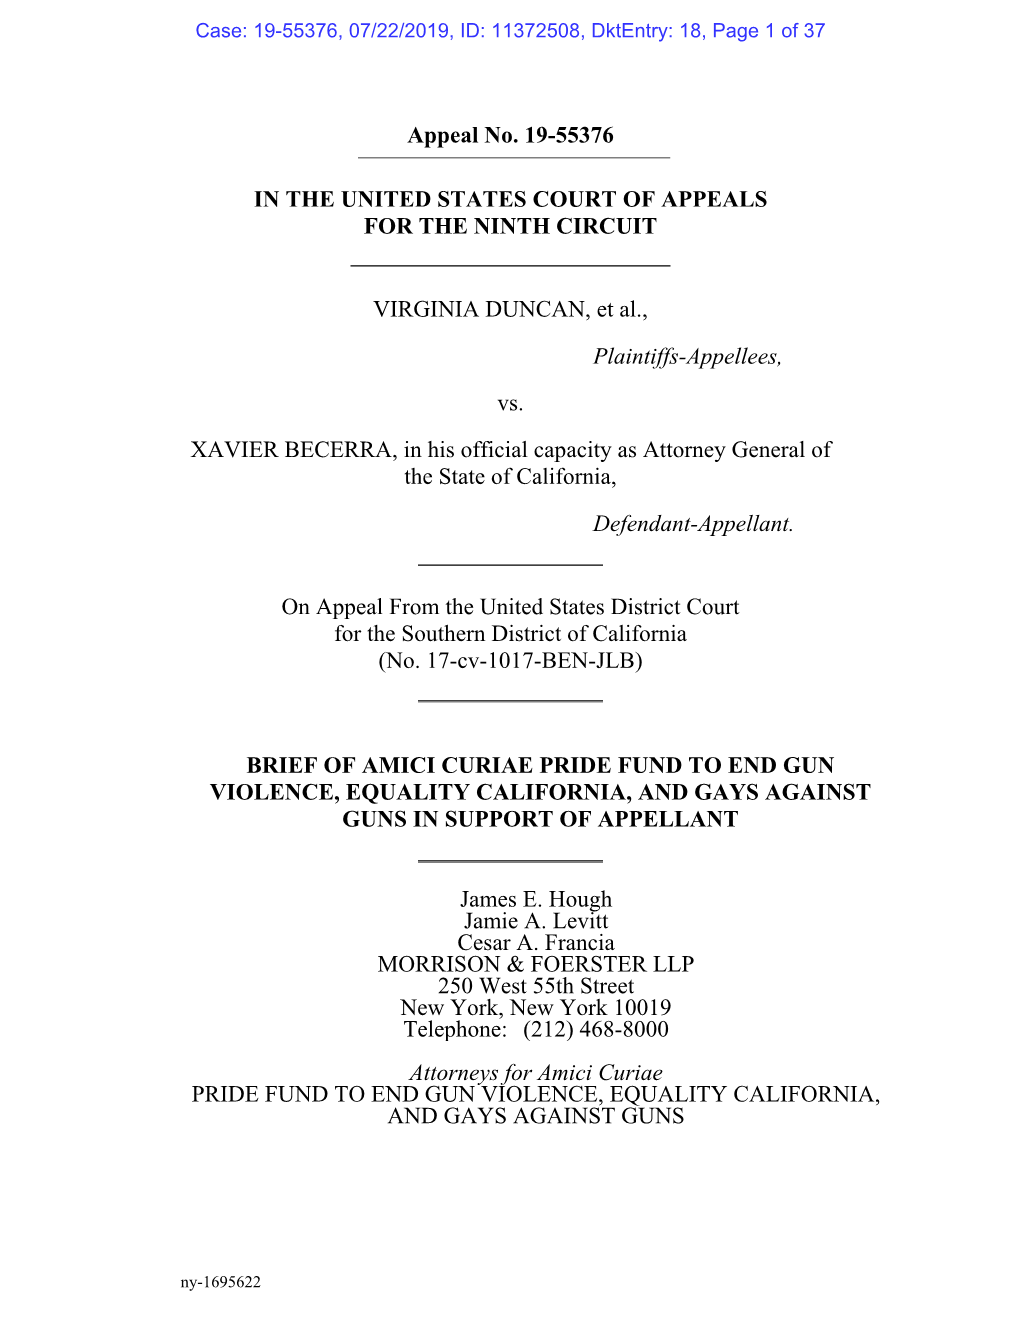 Amicus Brief of Pride Fund to End Gun Violence, Equality California, and Gays Against Guns In